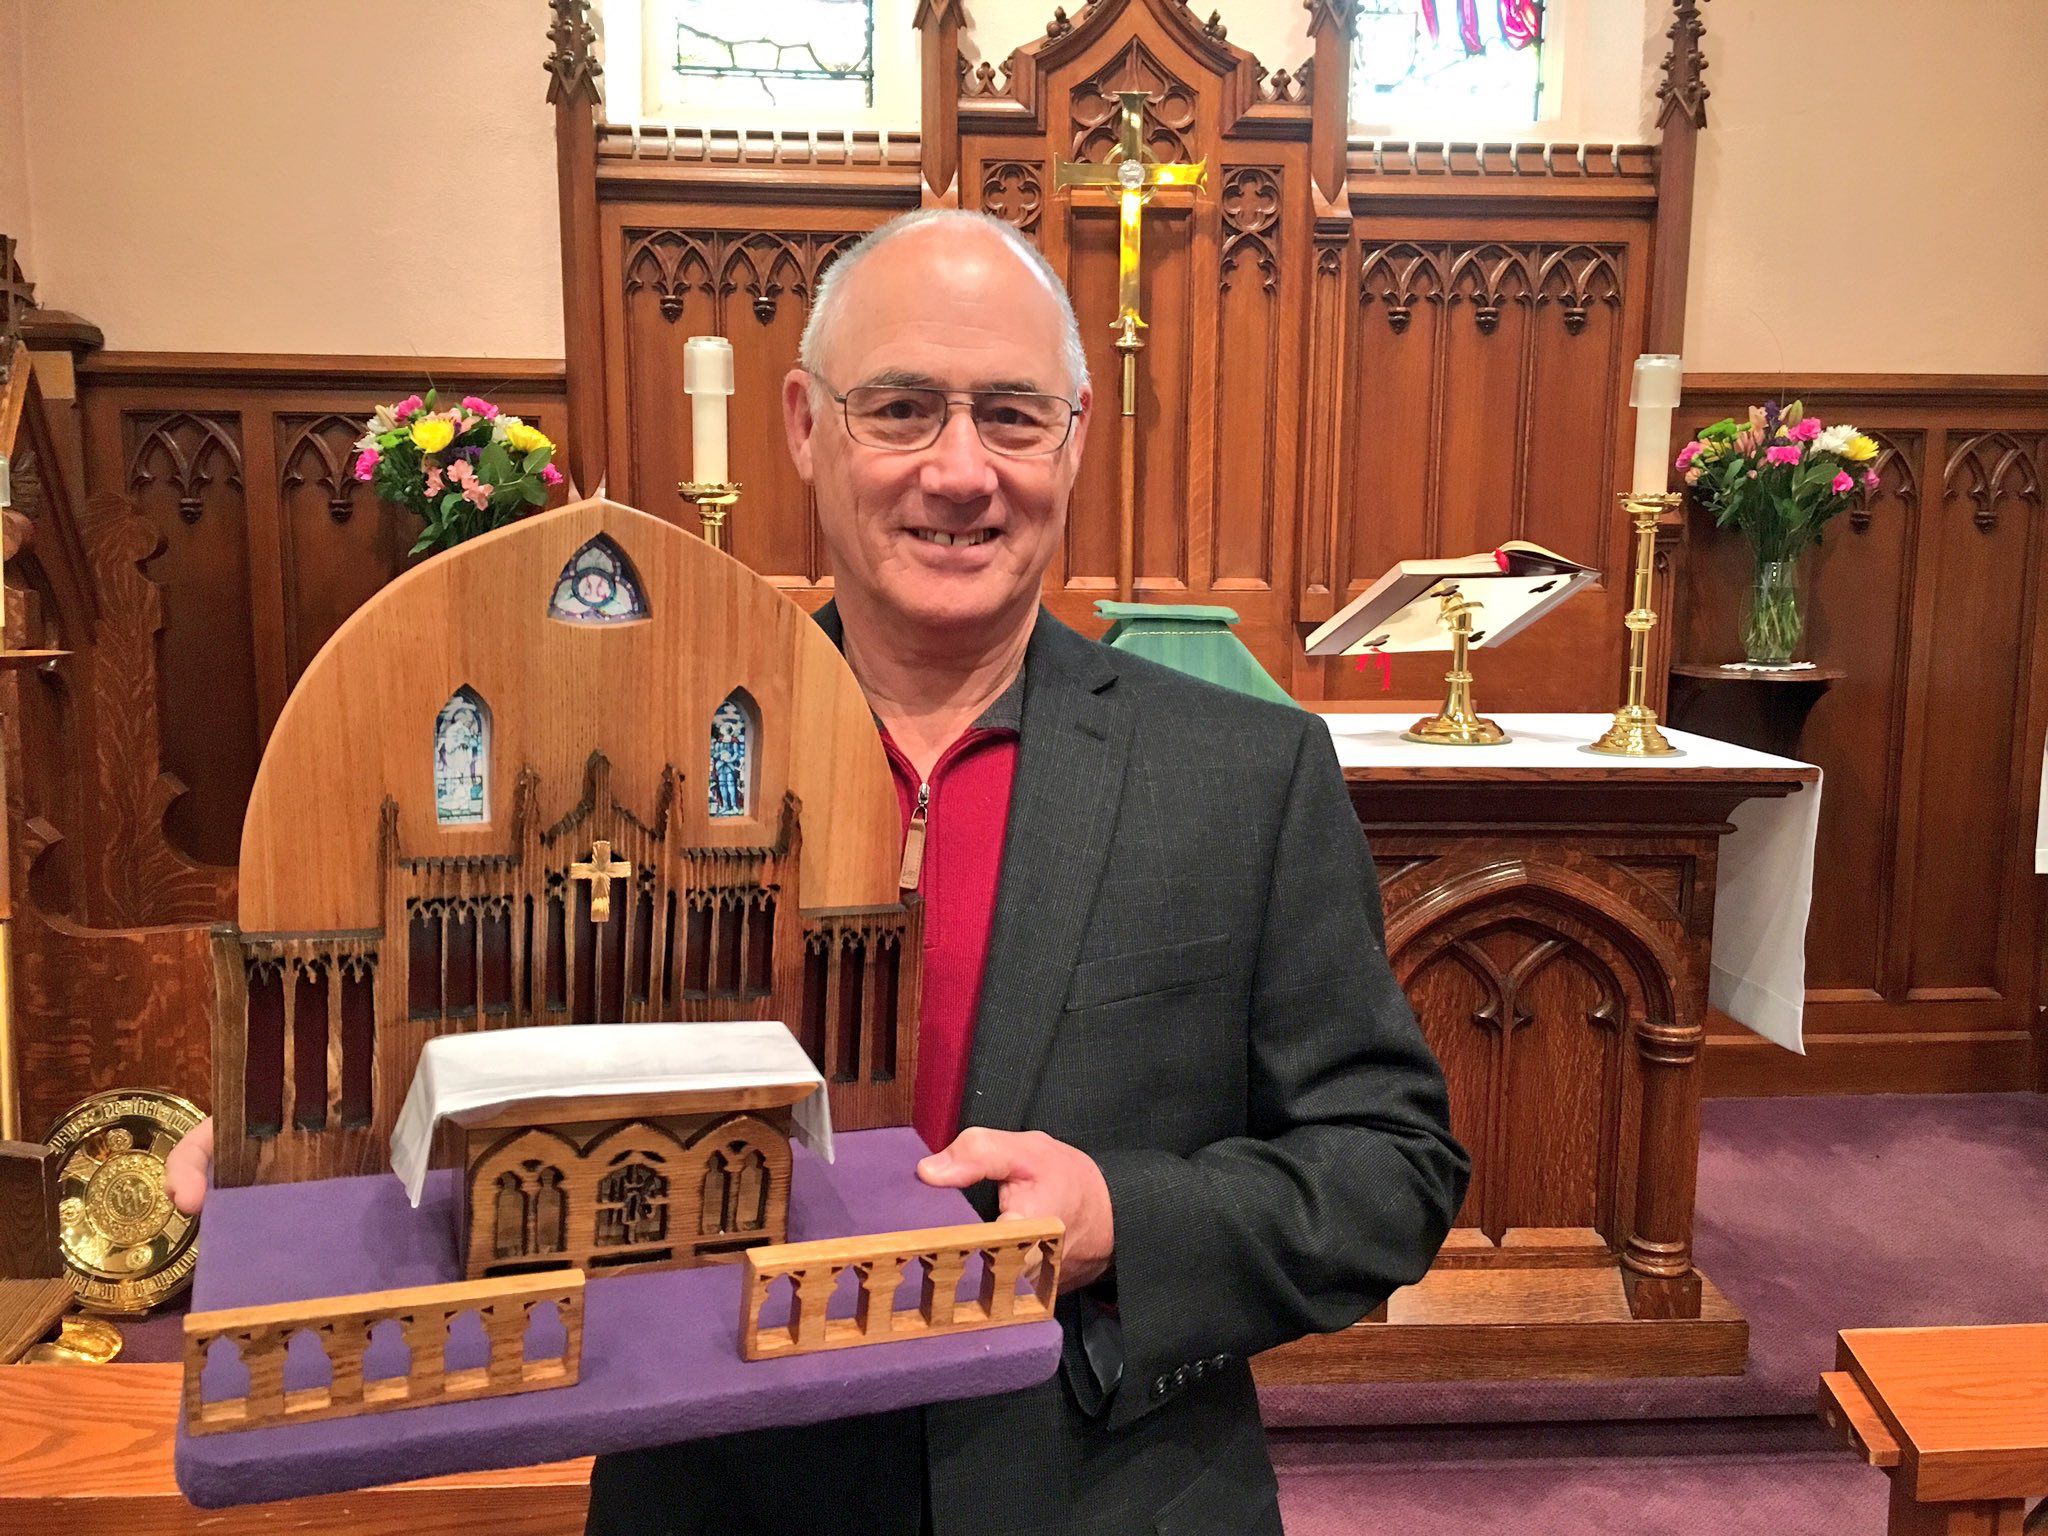 John Reaume holds the model of the sanctuary of St. George’s Georgetown, which he carved from an old wooden pew. Photo: Rob Park